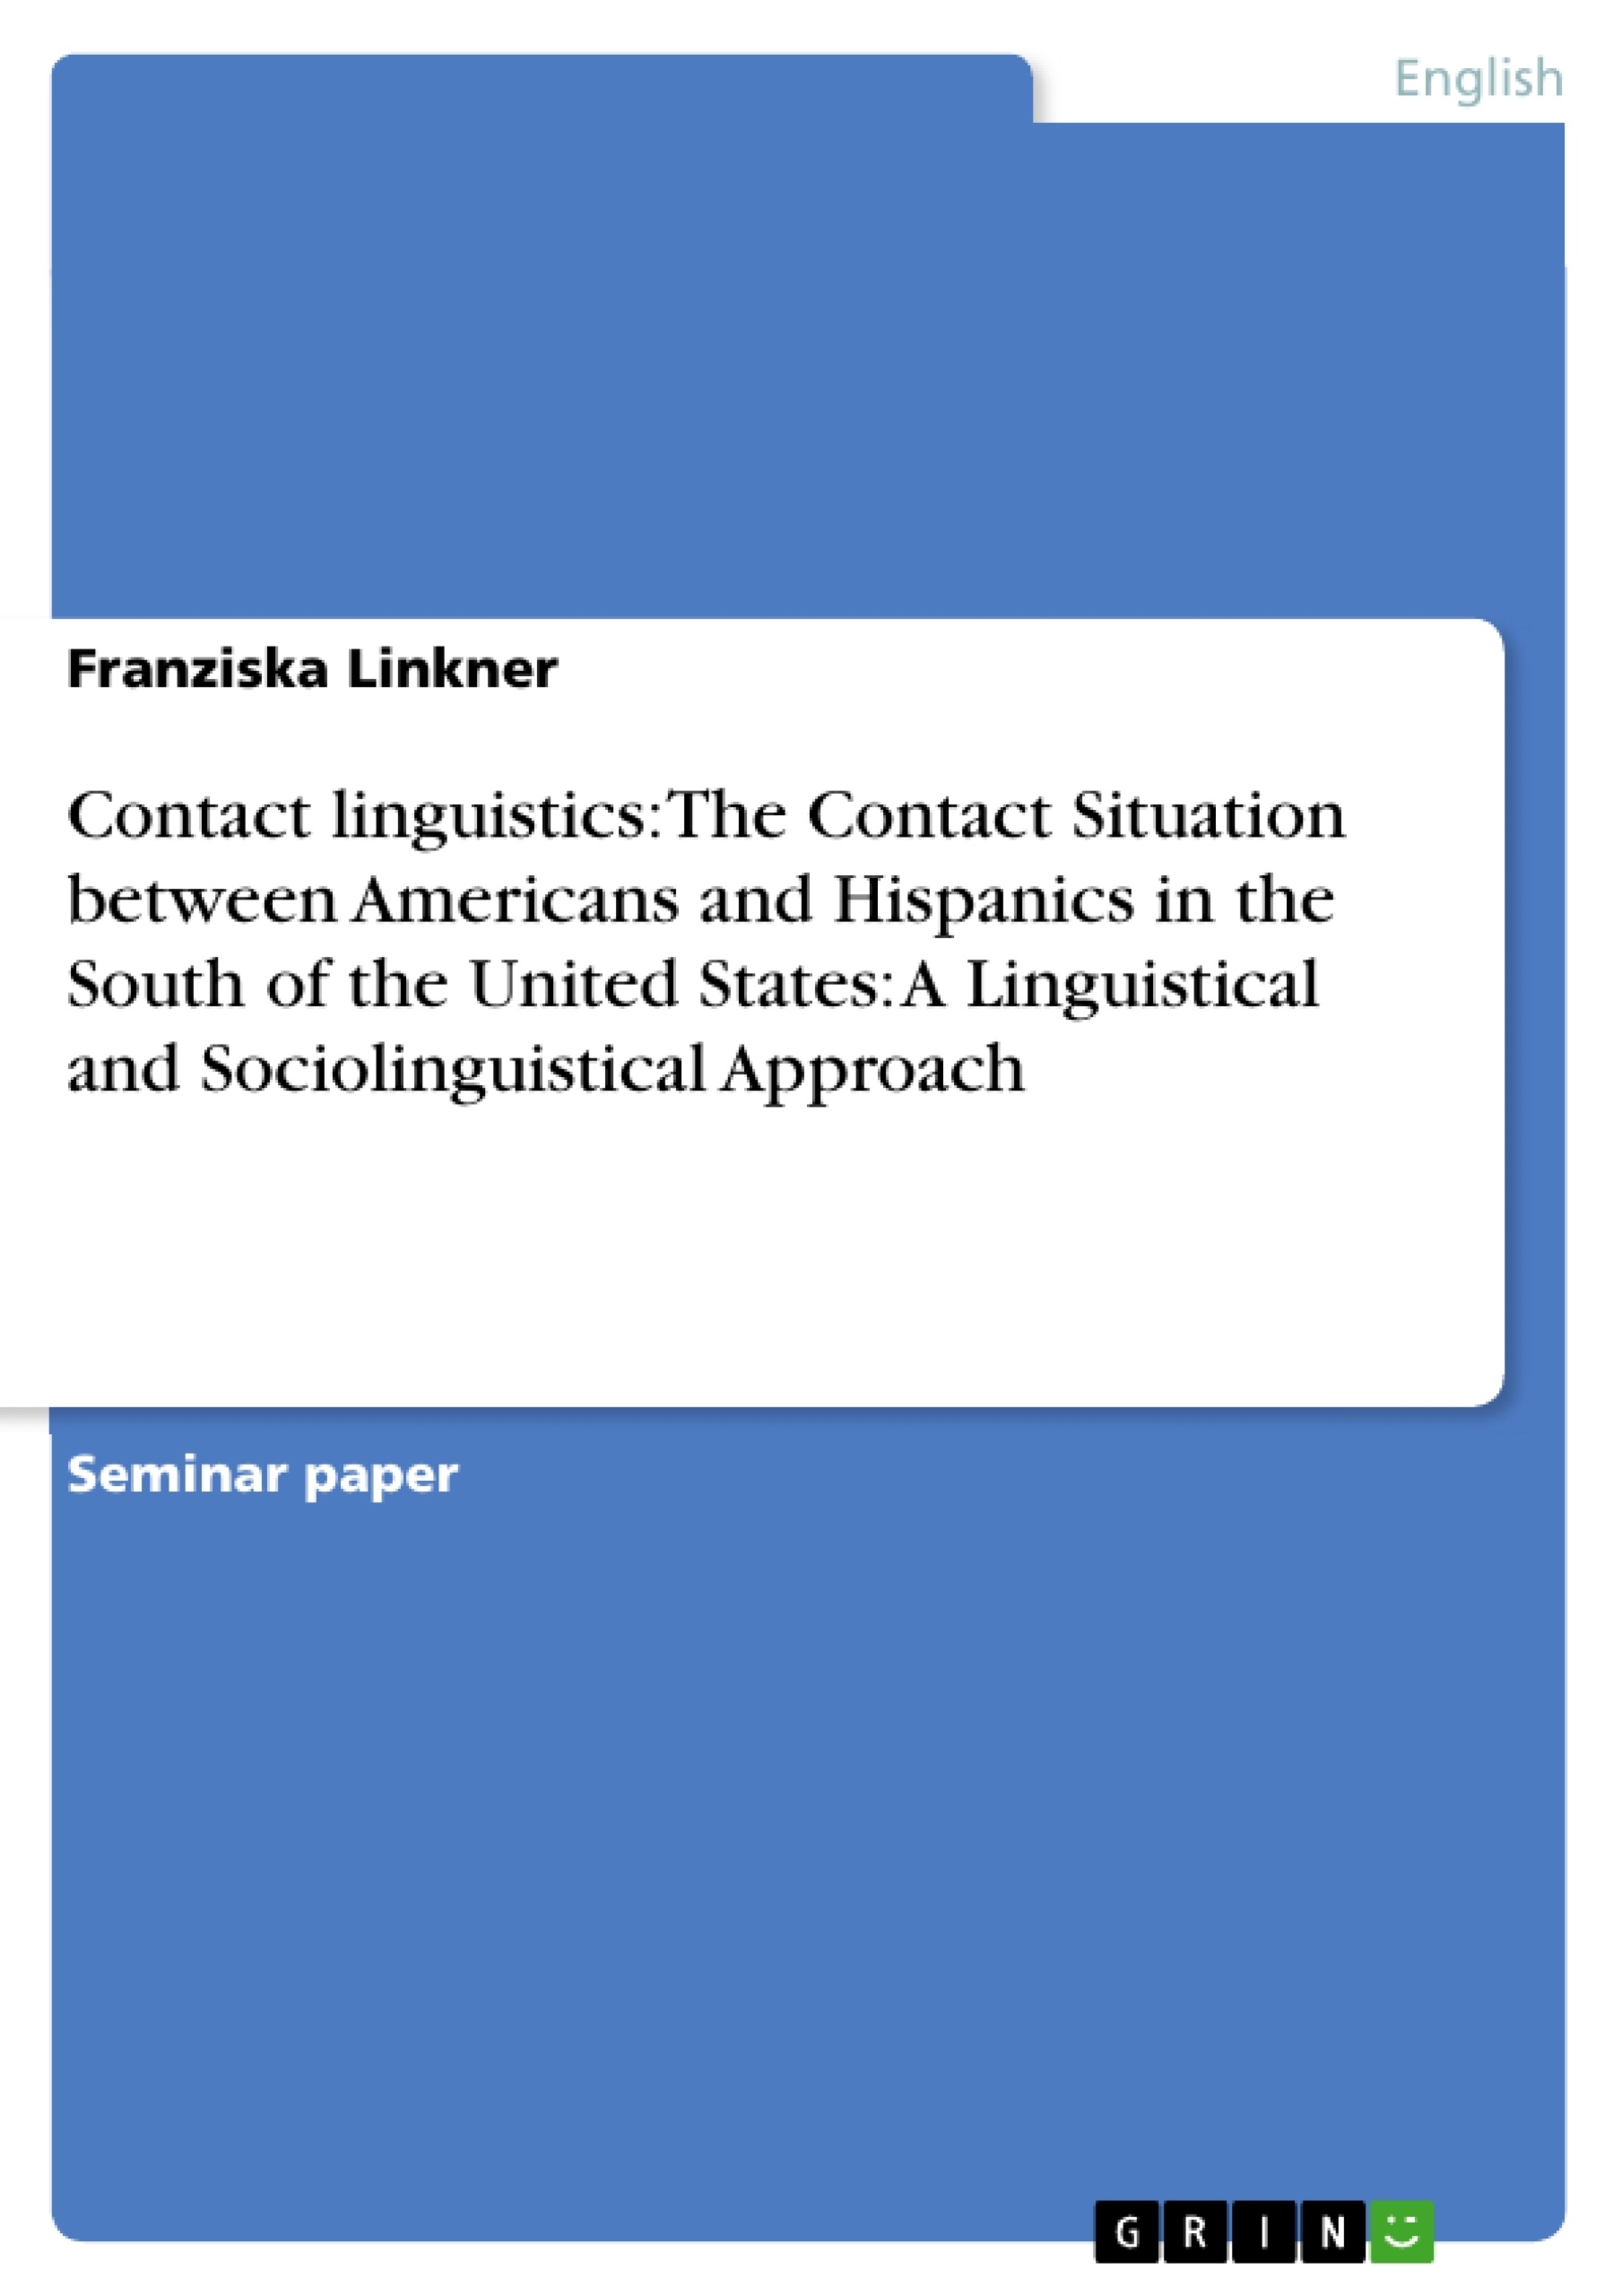 Título: Contact linguistics:  The Contact Situation between Americans and Hispanics in the South of the United States: A Linguistical and Sociolinguistical Approach